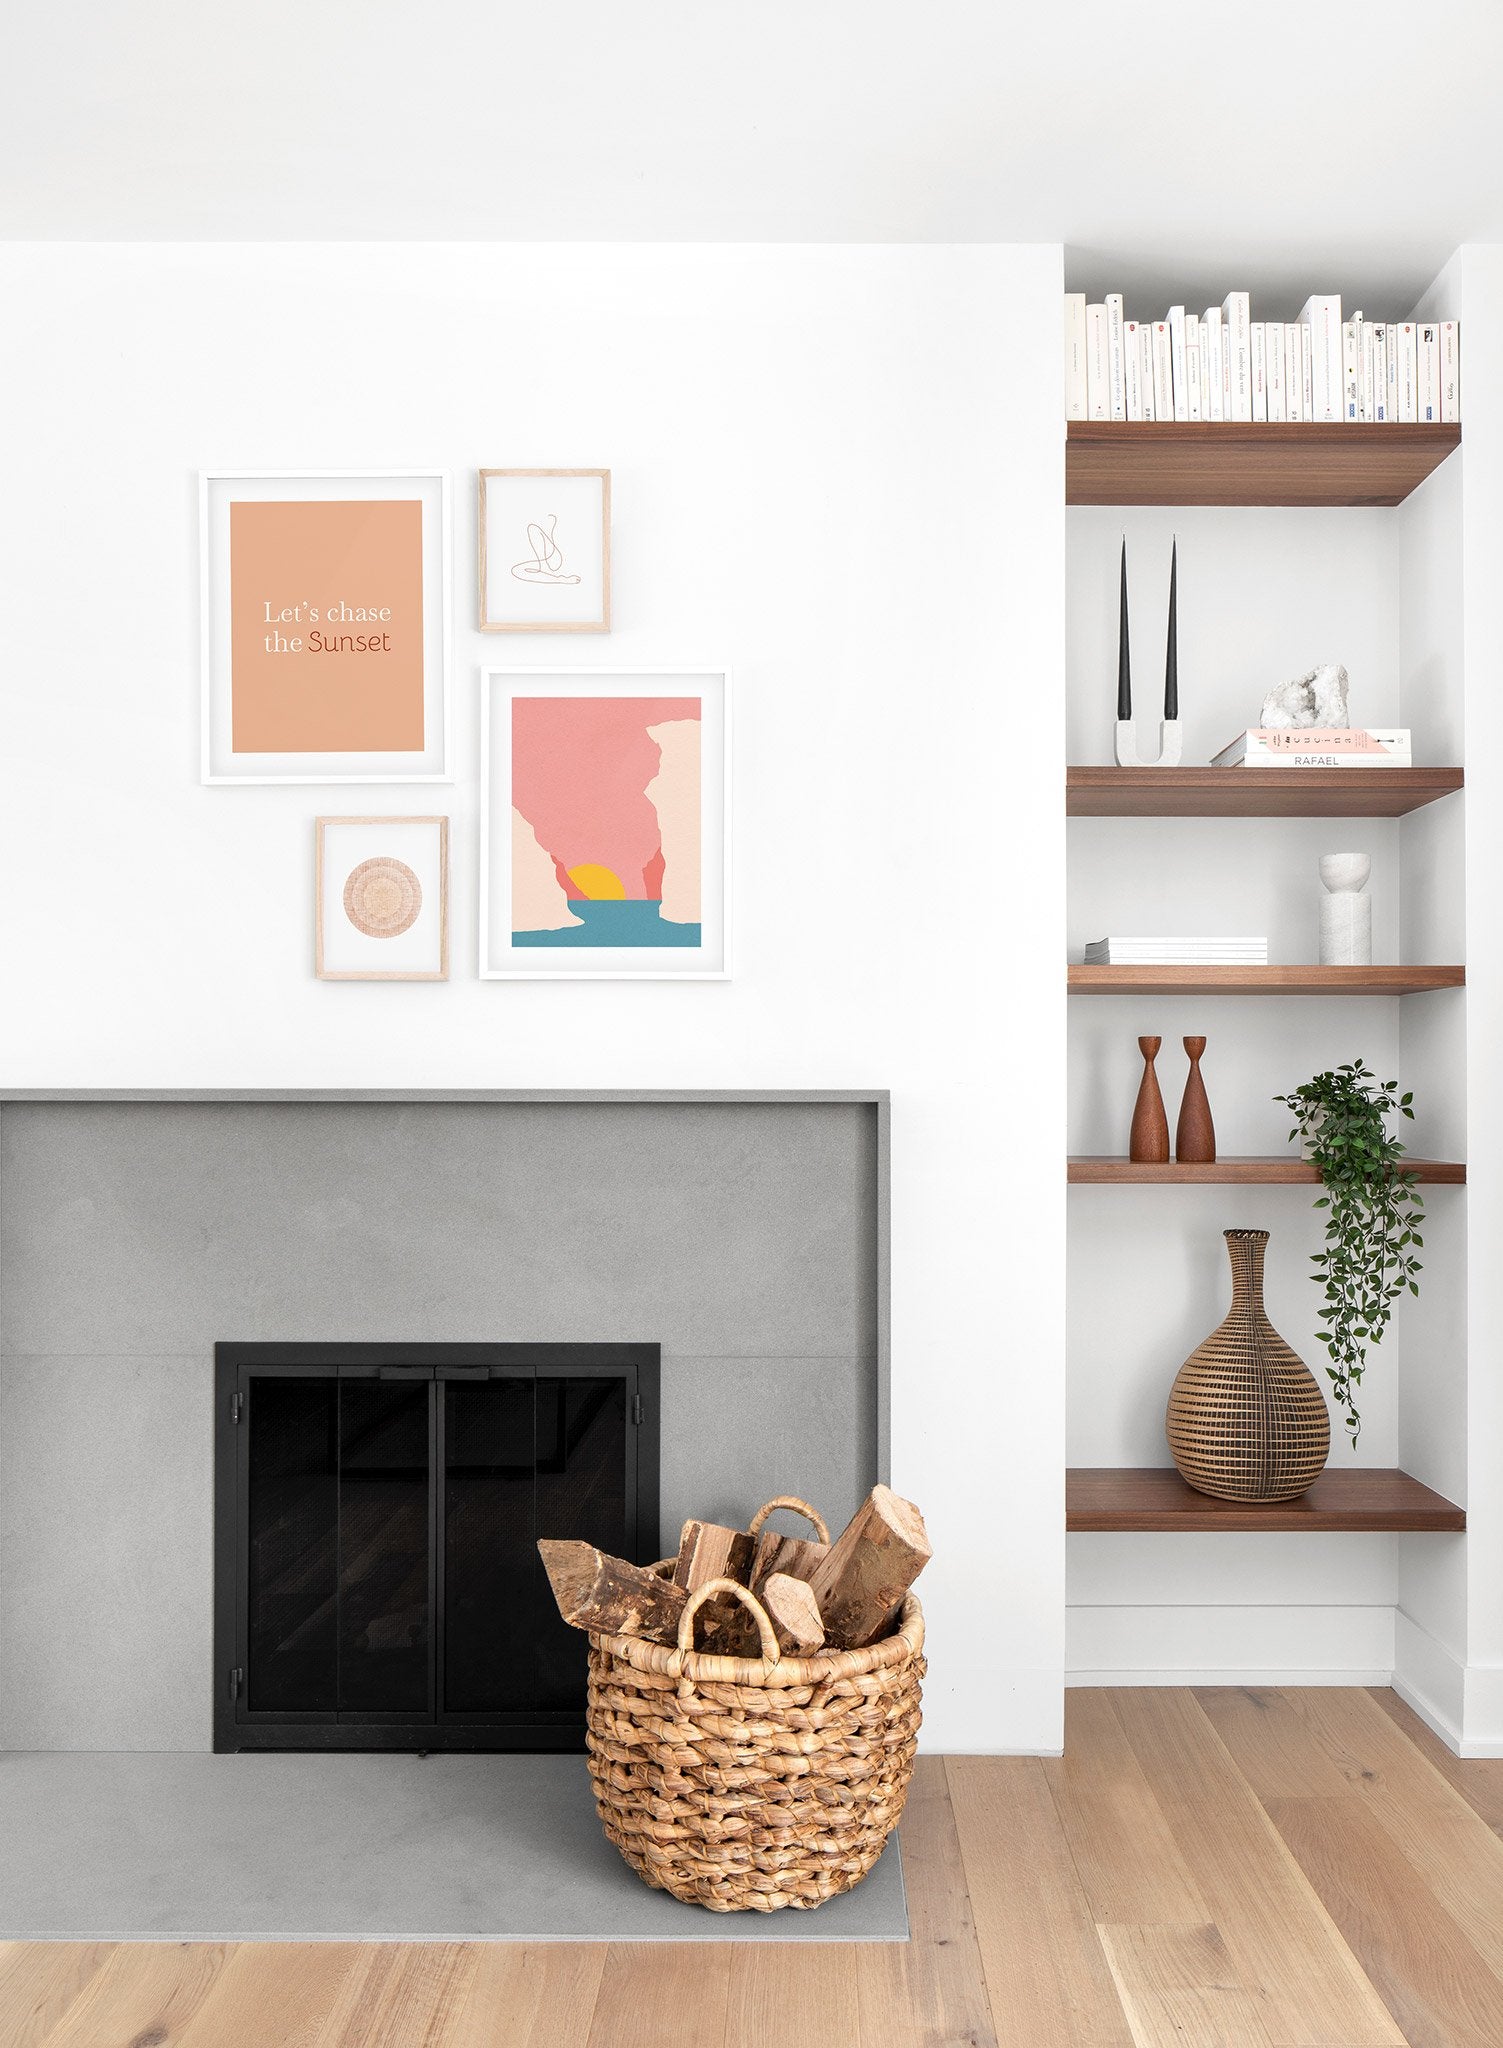 Minimalist pop art paper illustration by German artist Rosi Feist with sunset in Crete, Greece - Lifestyle Gallery - Living Room